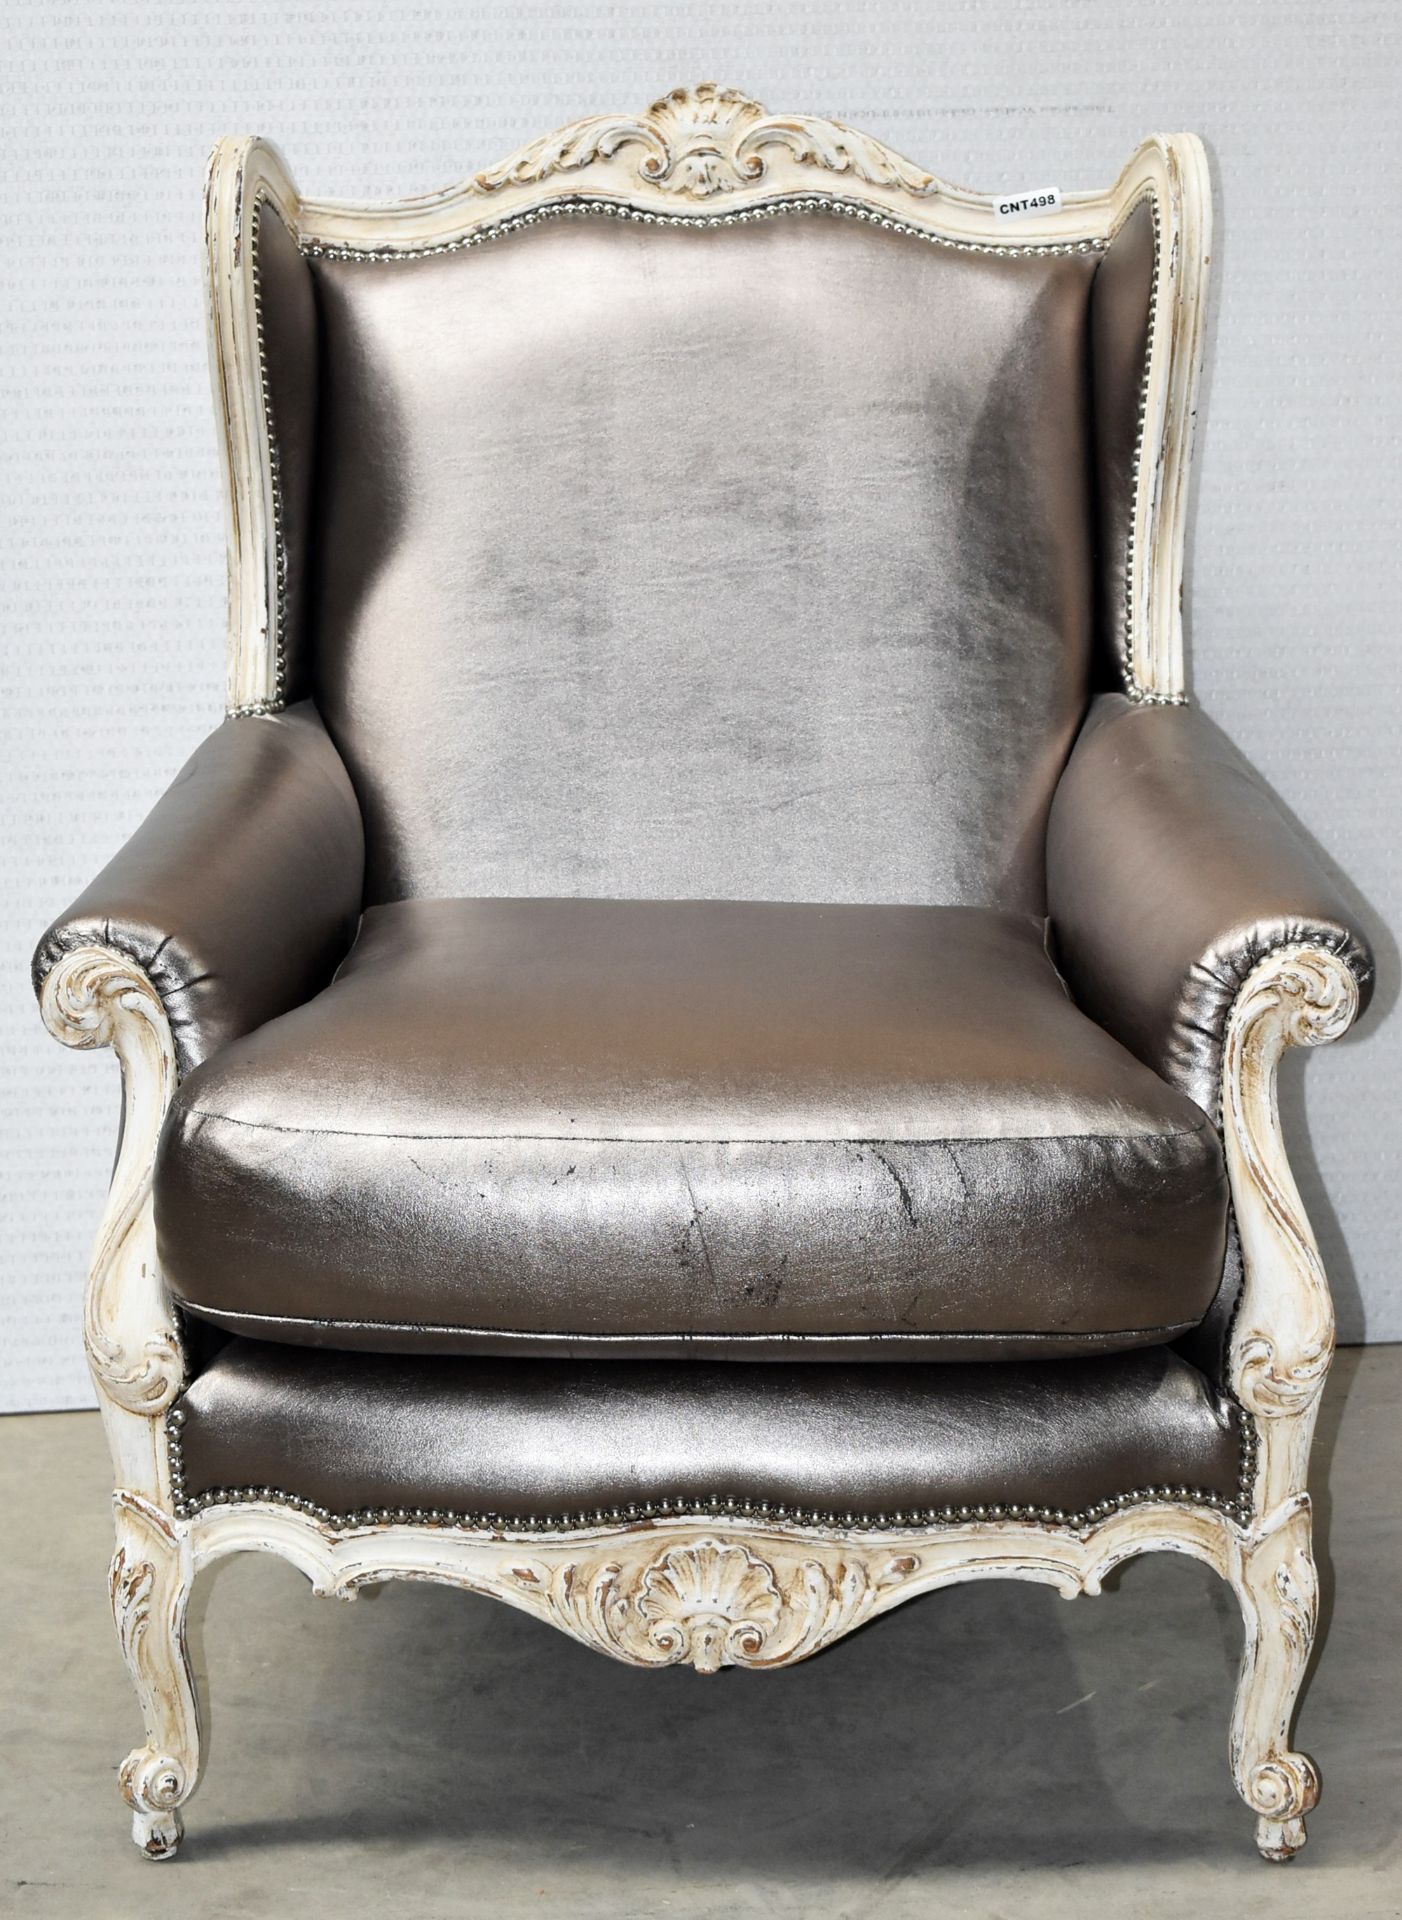 1 x Baroque Armchair In Silver Leather High Back Carved Leaf Detailing, Studded & Matching Ottoman - Image 4 of 10